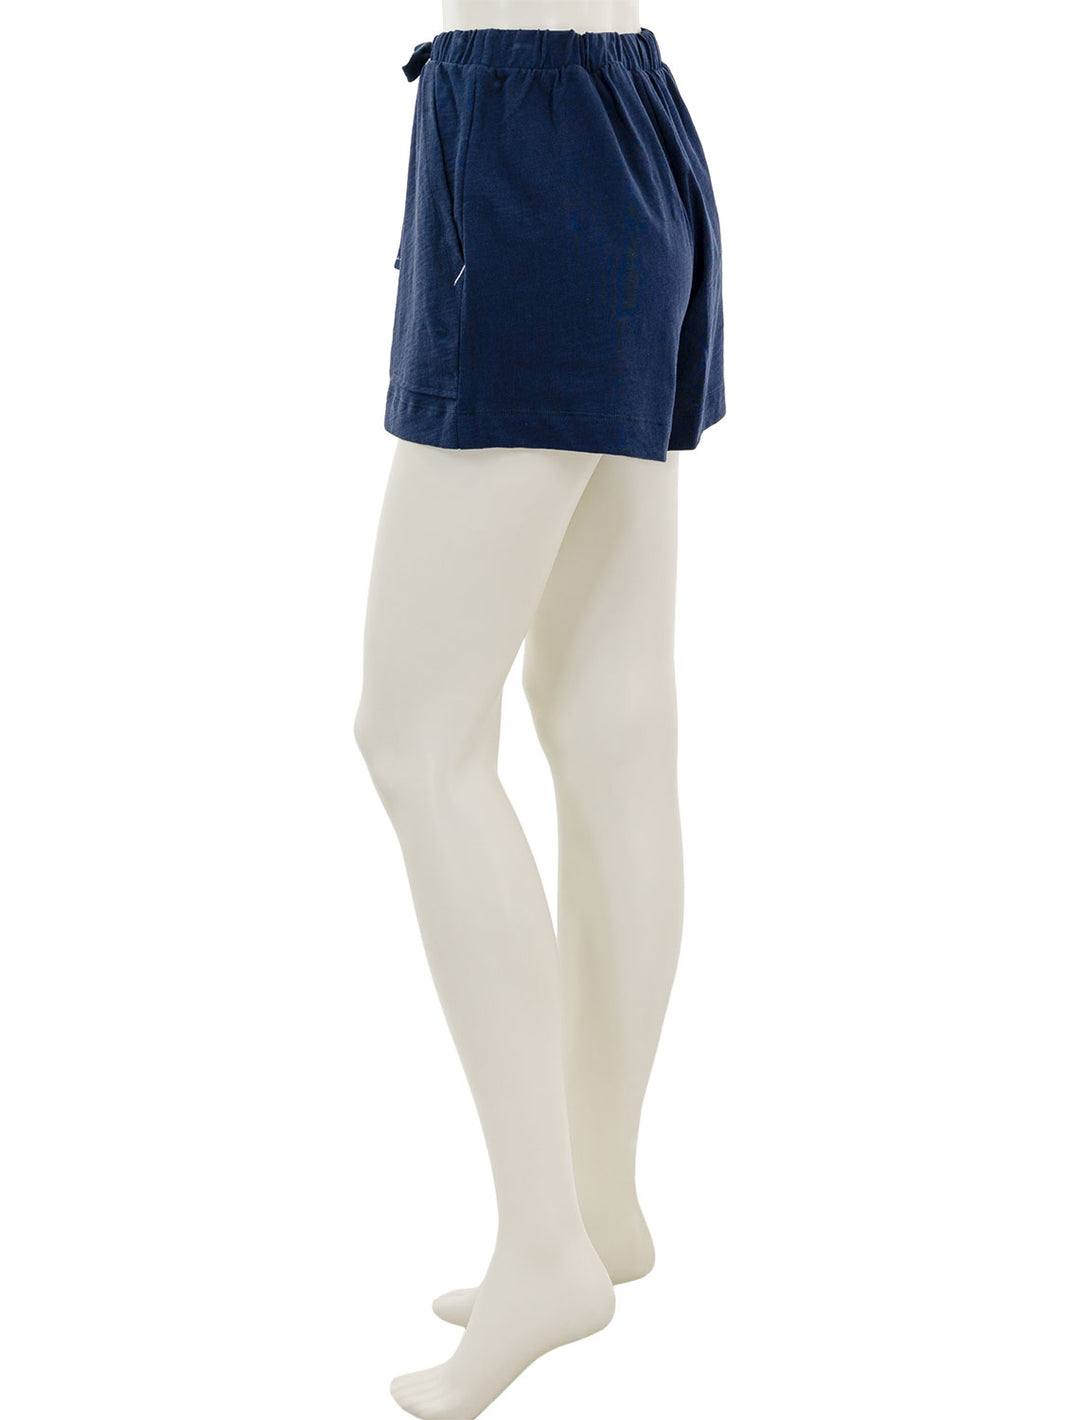 Side view of Lilla P.'s elastic waist drawstring shorts in navy.